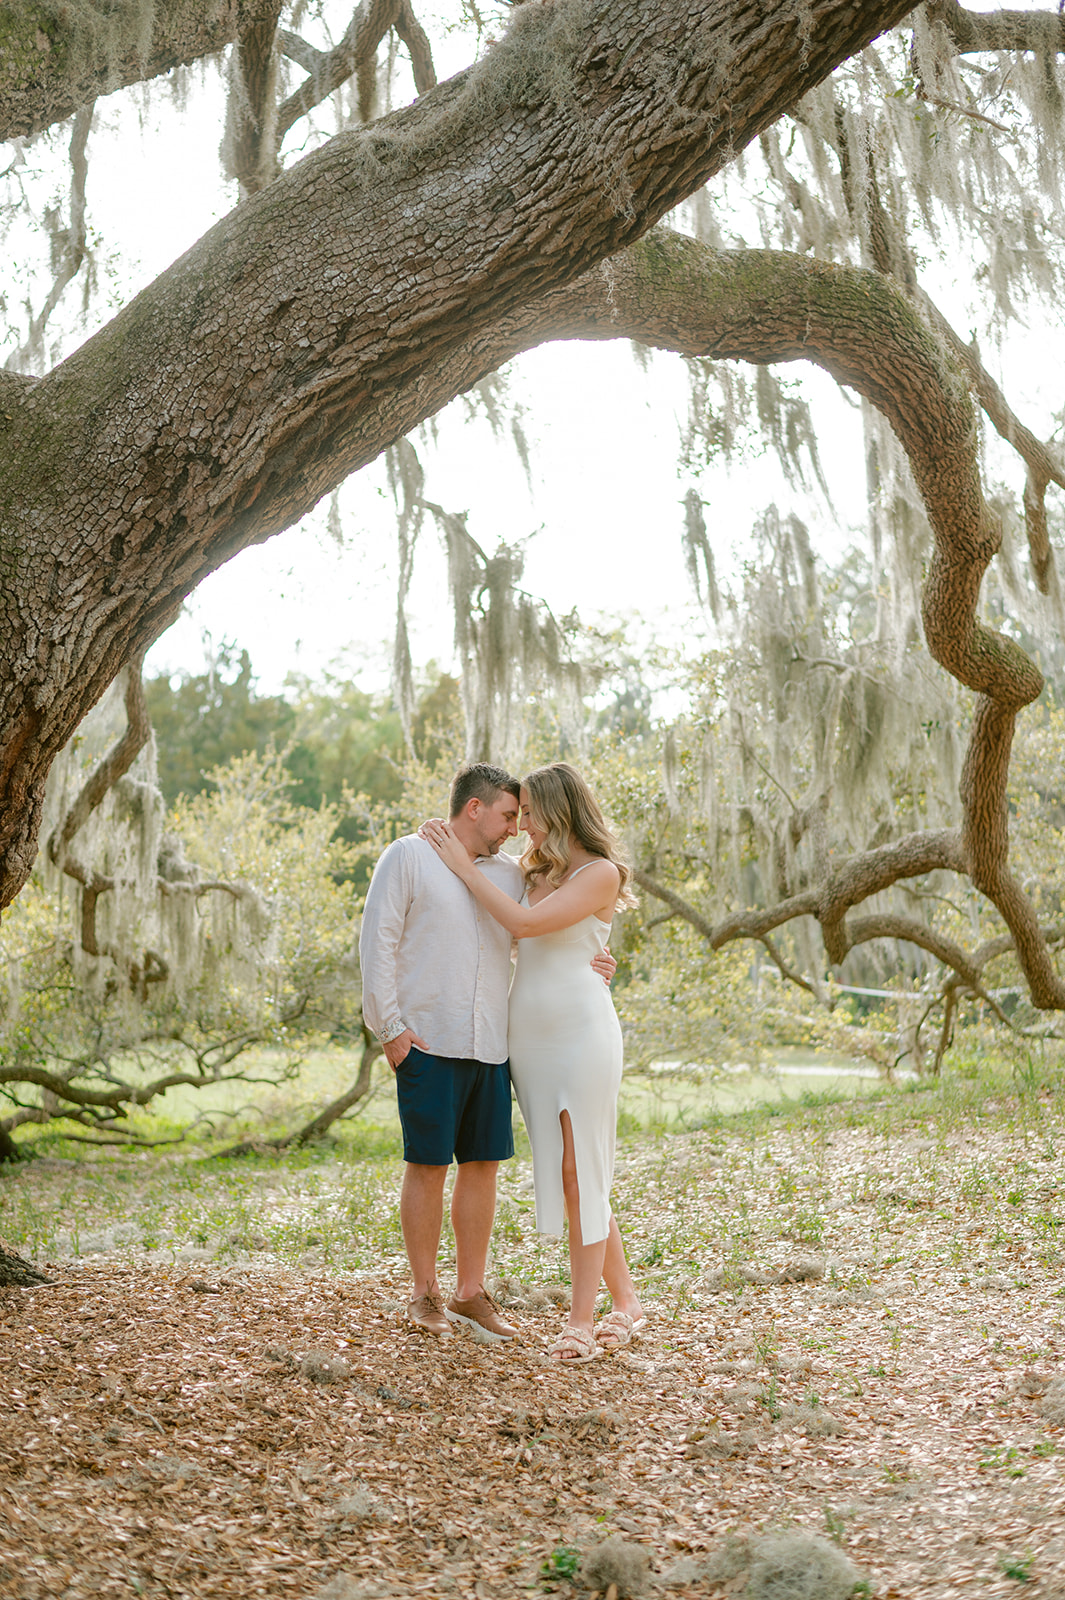 "Natural engagement photography in Philippe Park, Tampa Florida"
